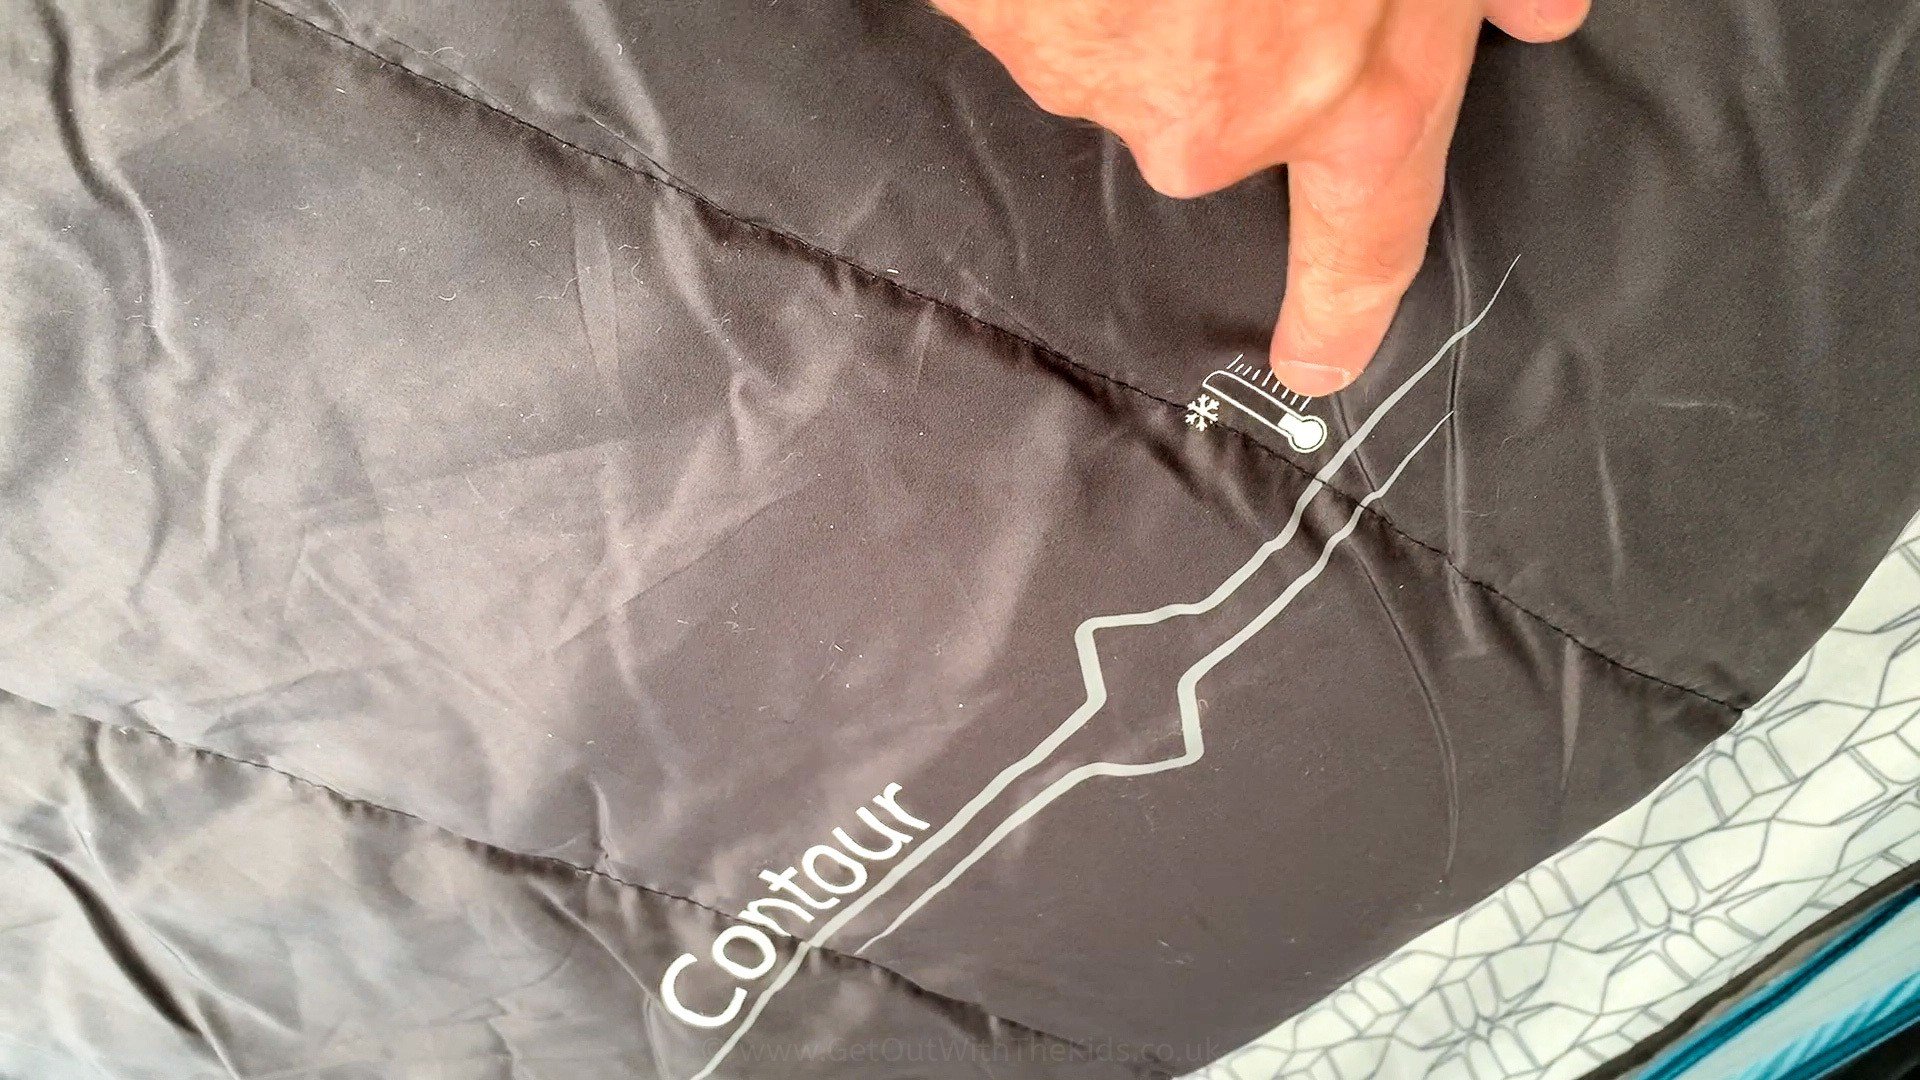 Cold side up indicator on the Contour sleeping bag